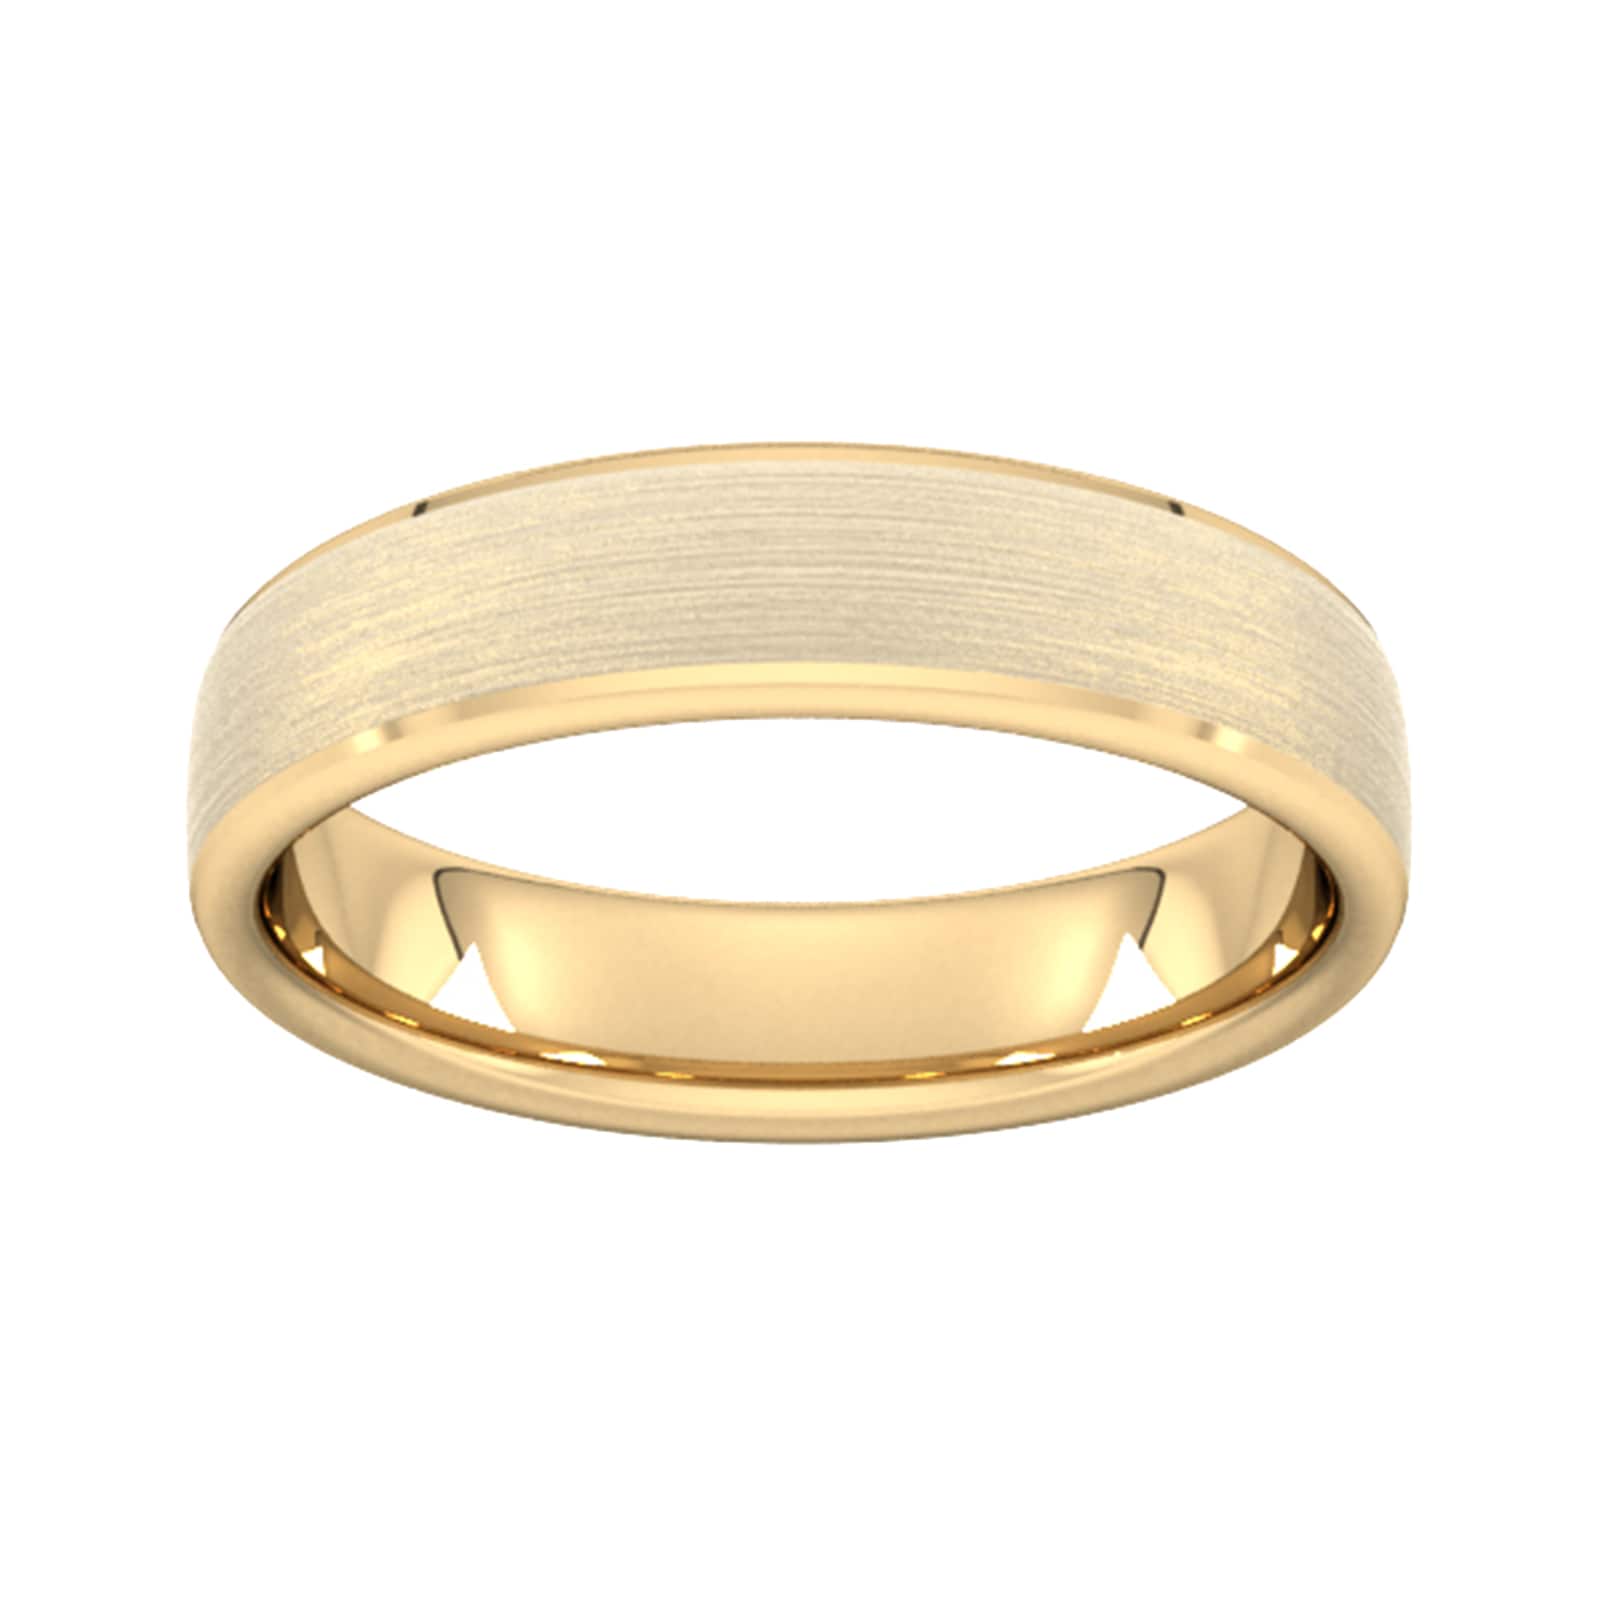 5mm Slight Court Extra Heavy Polished Chamfered Edges With Matt Centre Wedding Ring In 18 Carat Yellow Gold - Ring Size H